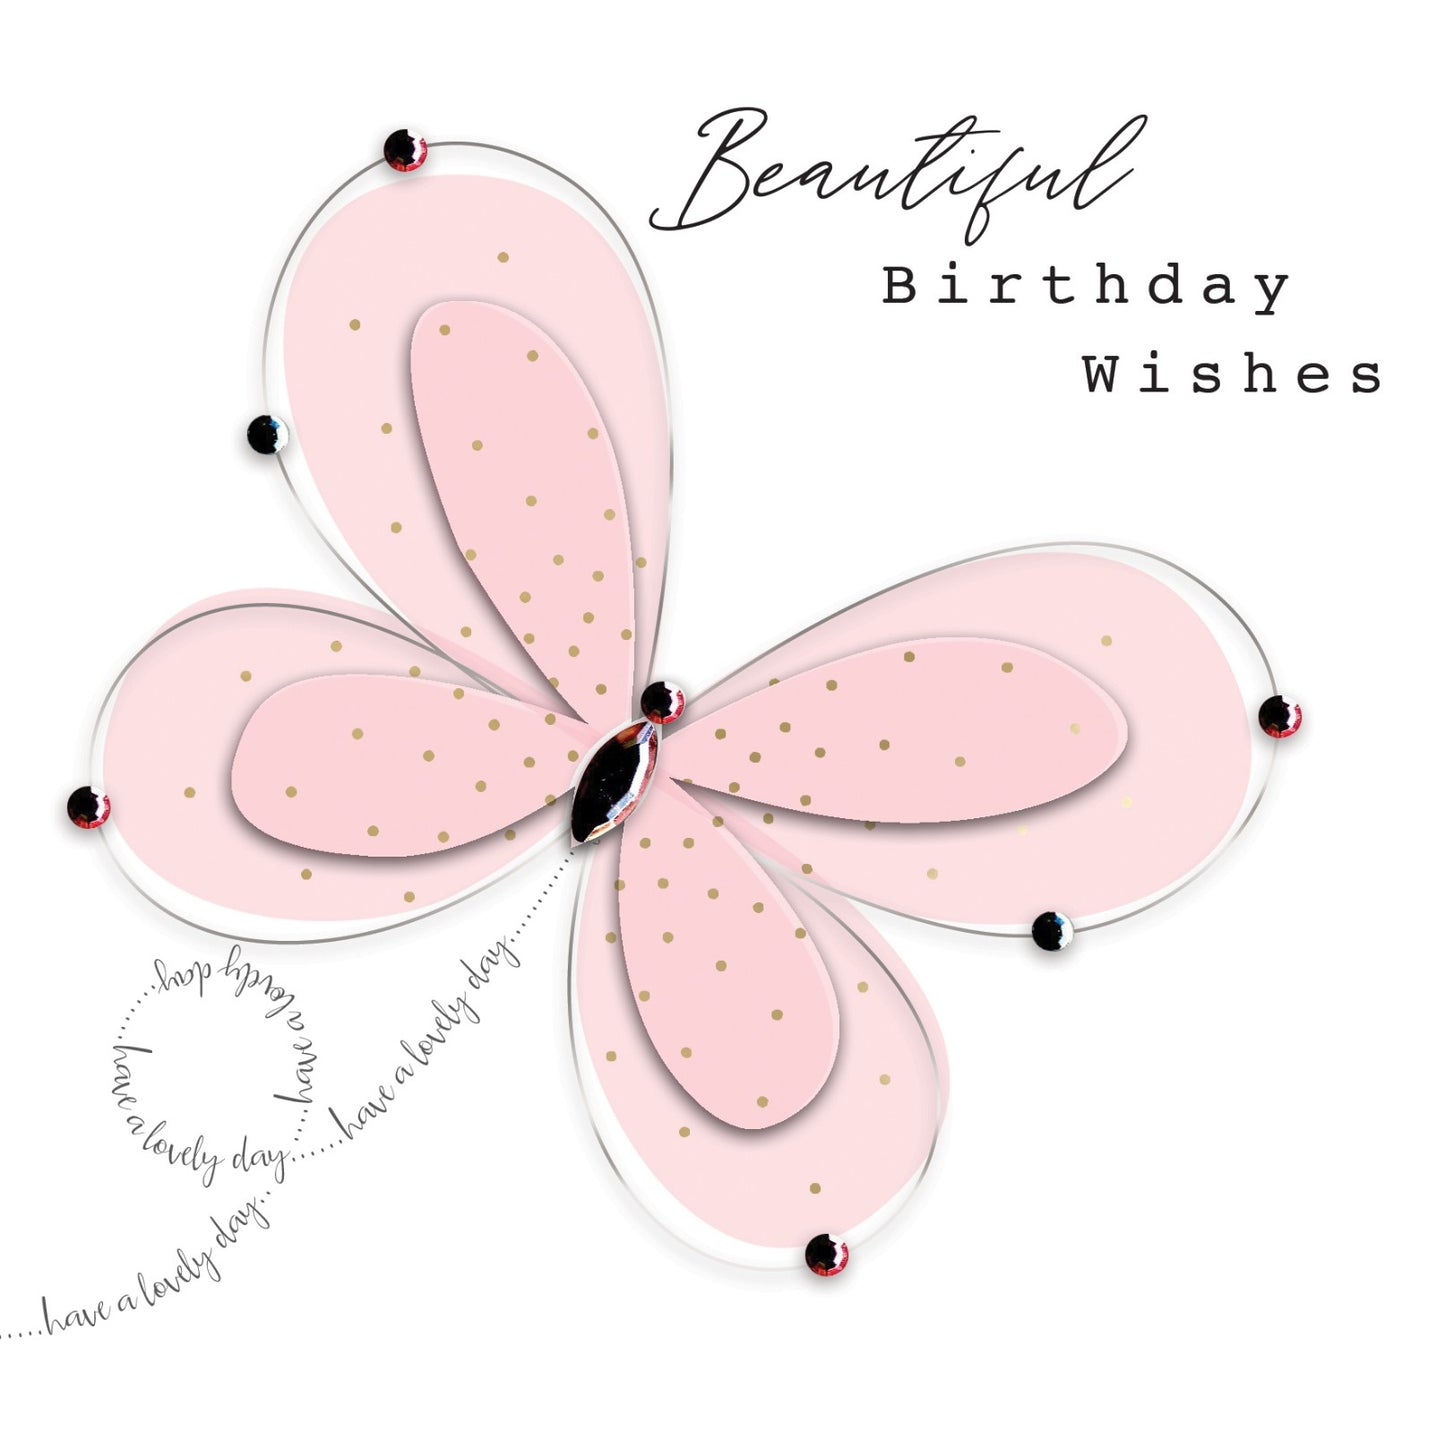 Beautiful Birthday Wishes Sparkly Flutter Fun! Birthday Hand-Finished Greeting Card